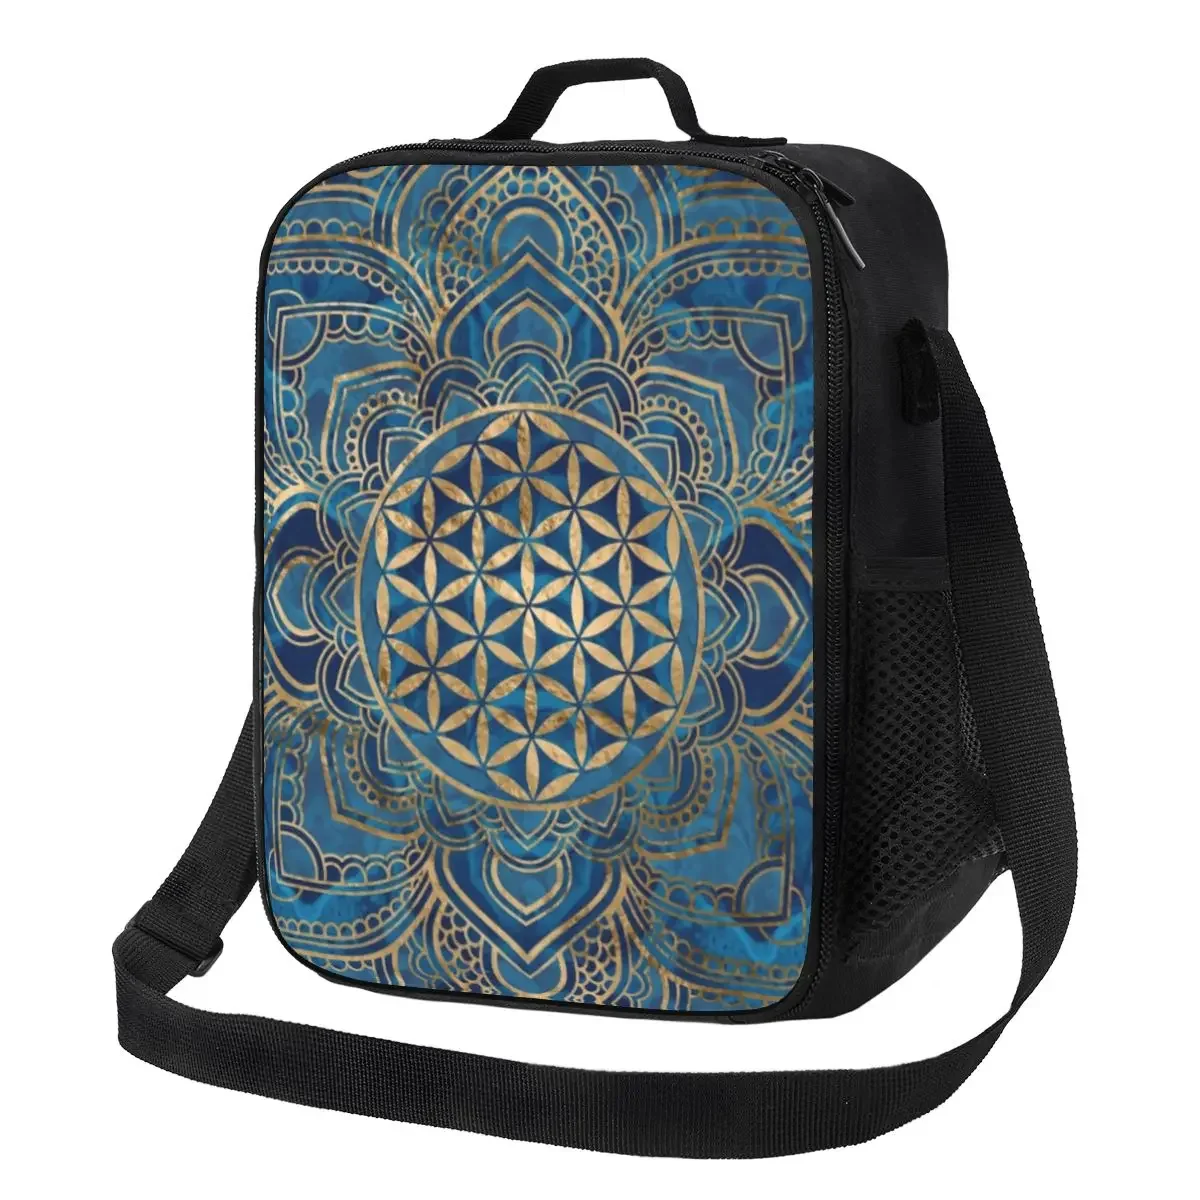 

Flower Of Life In Lotus Mandala Insulated Lunch Bag for Women Cooler Thermal Lunch Tote Office Picnic Travel